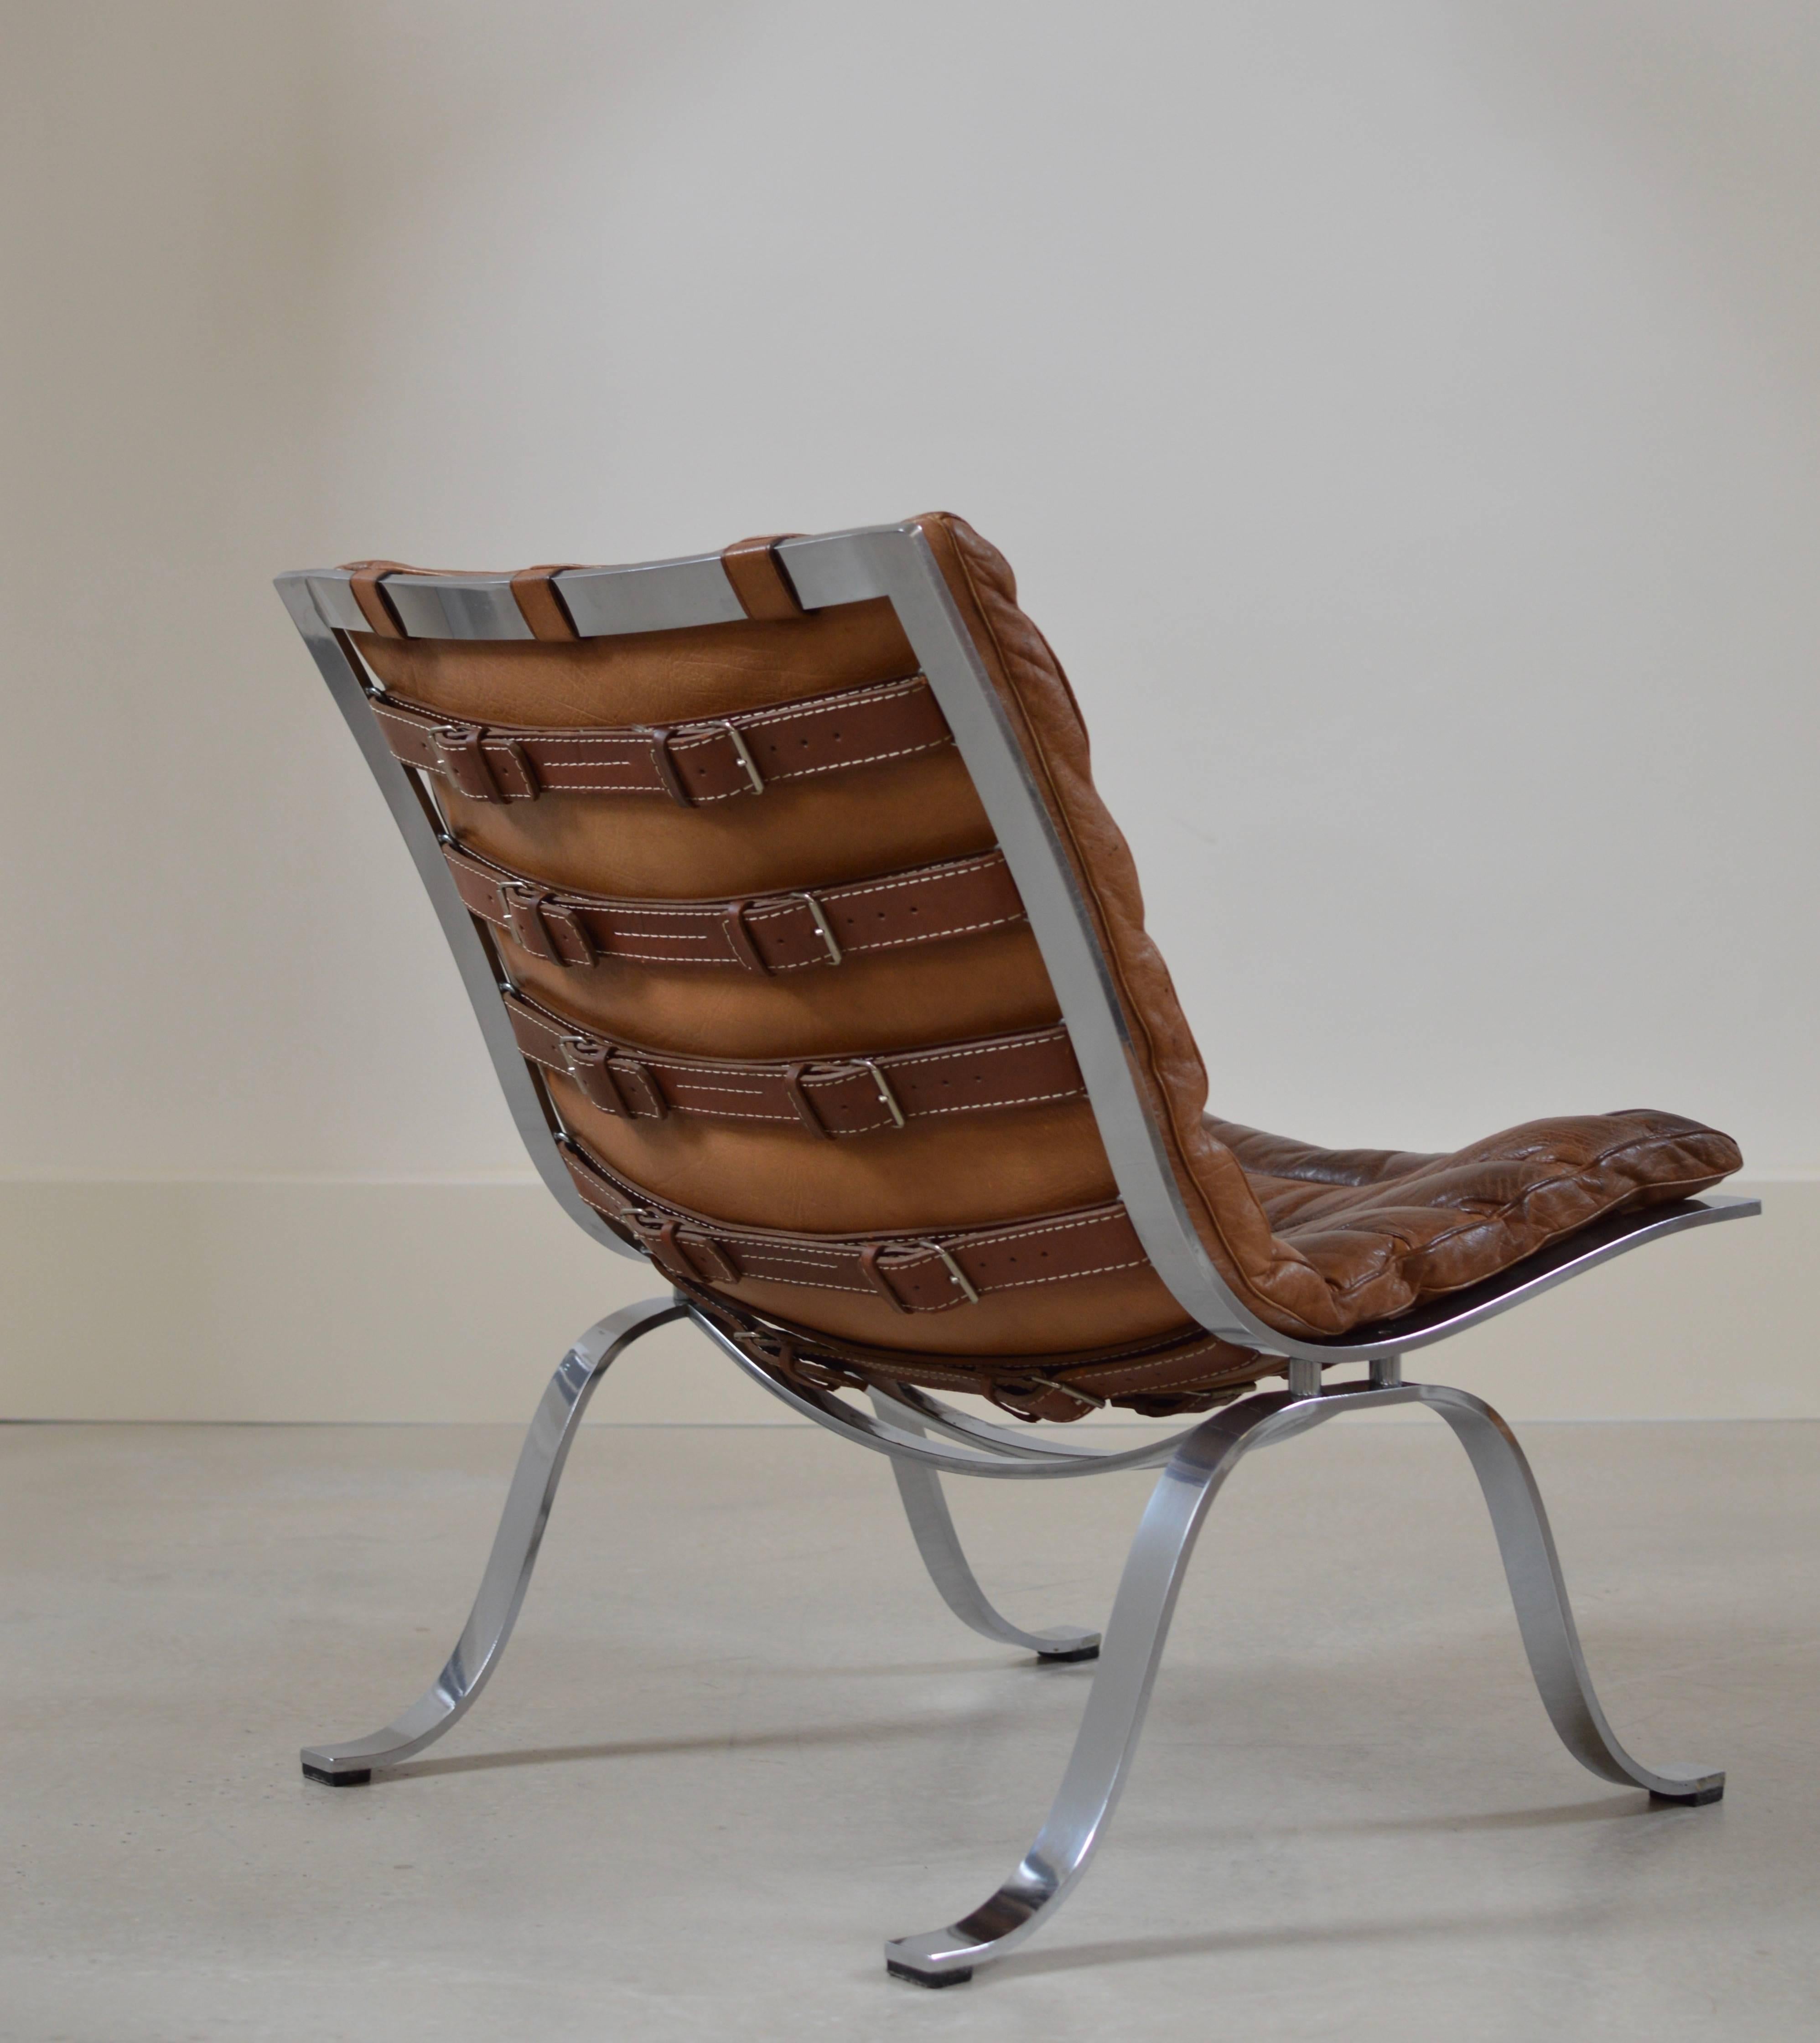 Rarely seen 'Ariet' Lounge chair by Swedish Designer Arne Norell in a beautiful brown patinated buffalo leather and finest high gloss chromed frame. 
Please note the beautiful belts with buckles, this distinct detailing gives the chair a beautiful